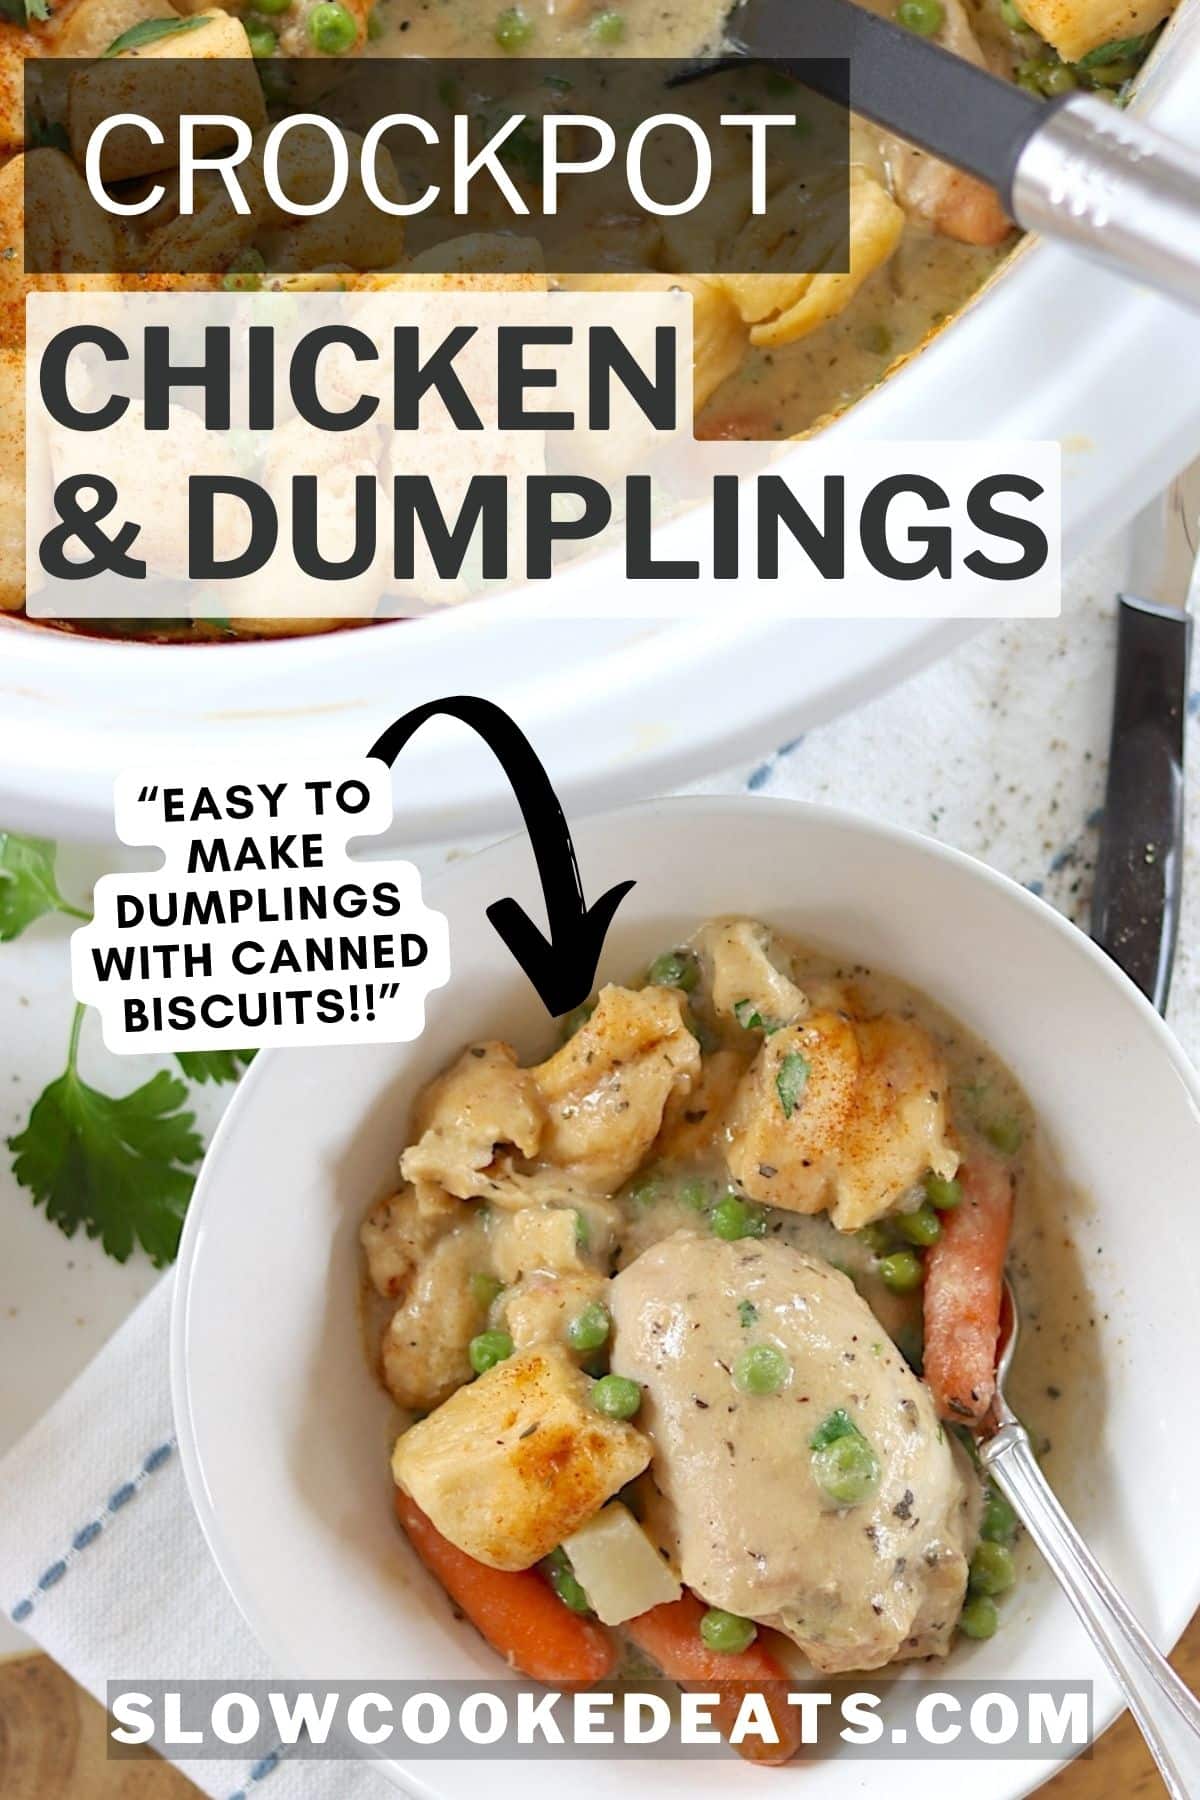 Slow cooker chicken and dumplings served in a white bowl with a spoon.